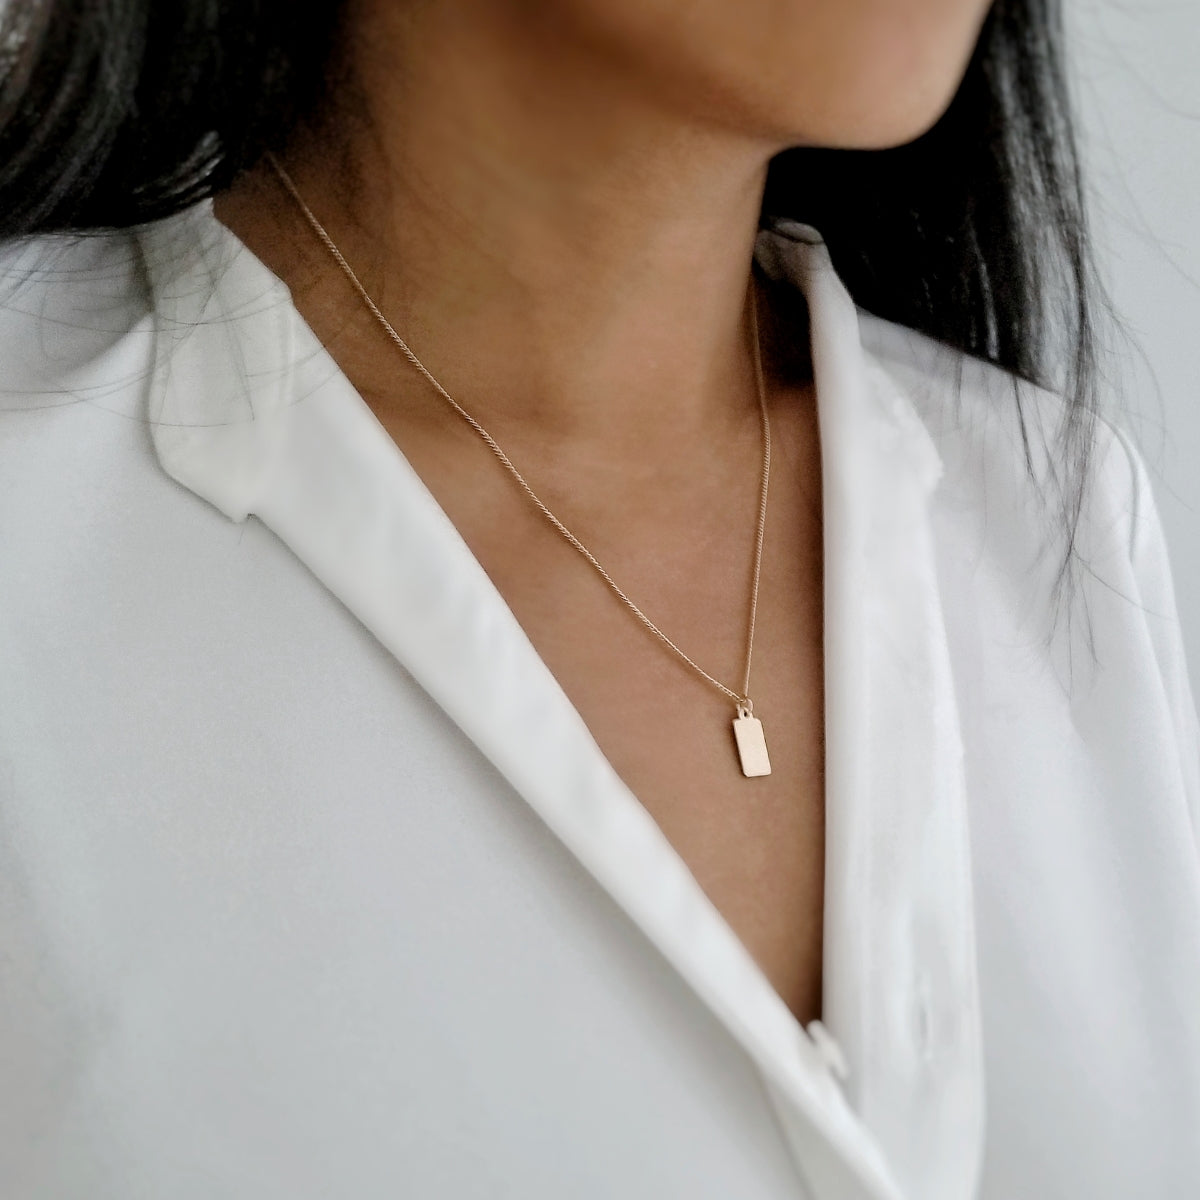 Gold necklace with blank initial tag